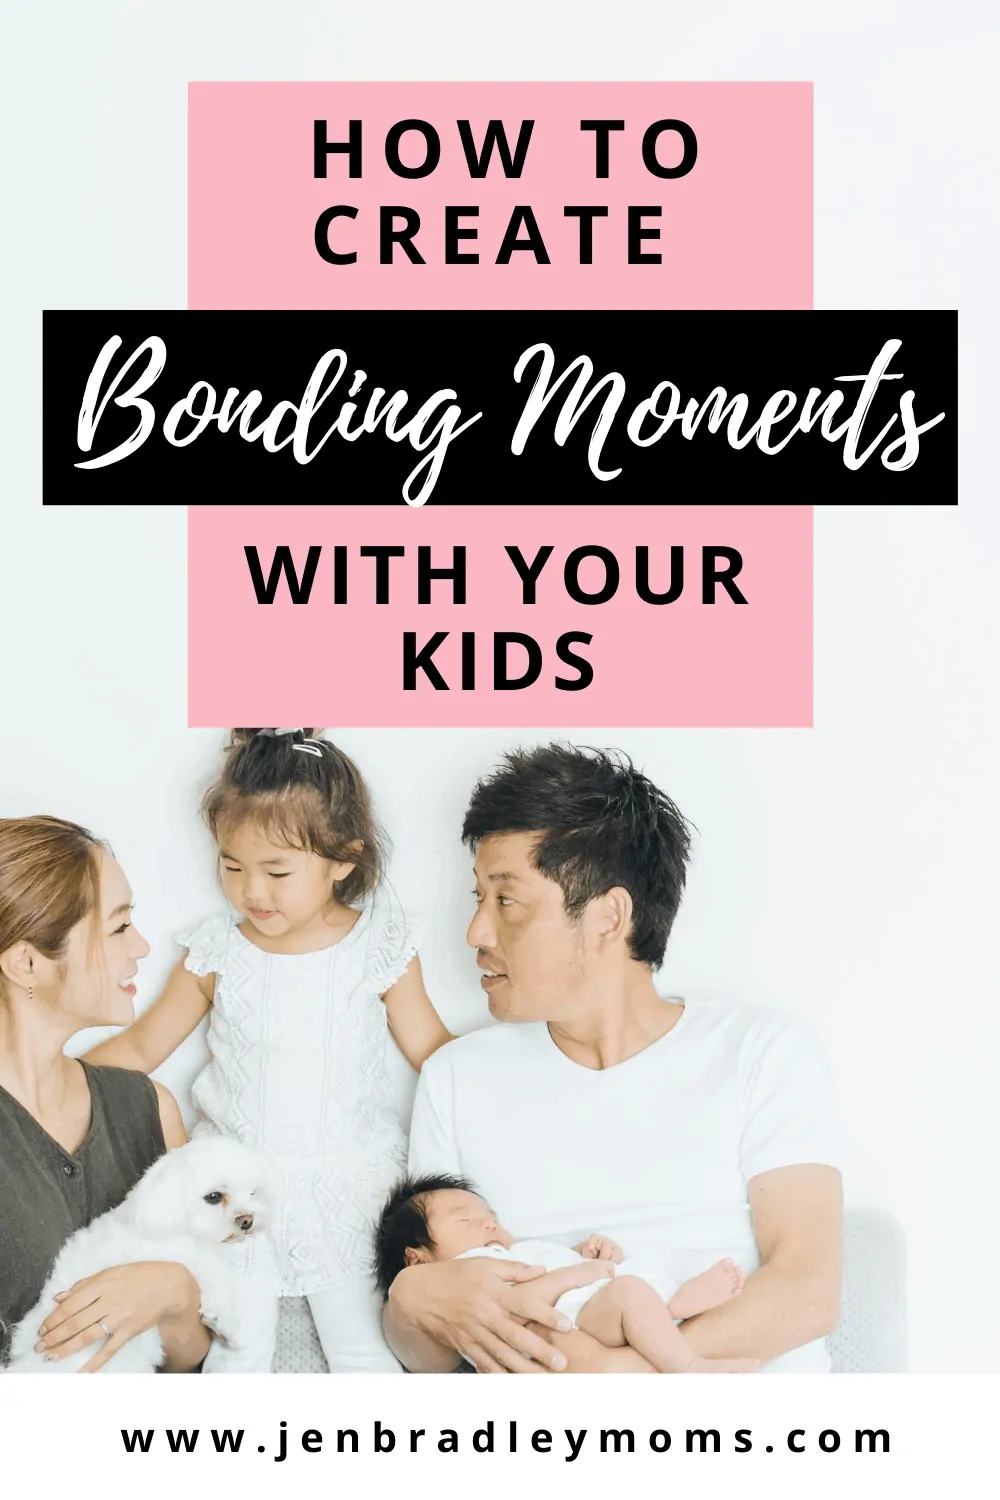 How to Create Opportunities for Family Bonding Activities